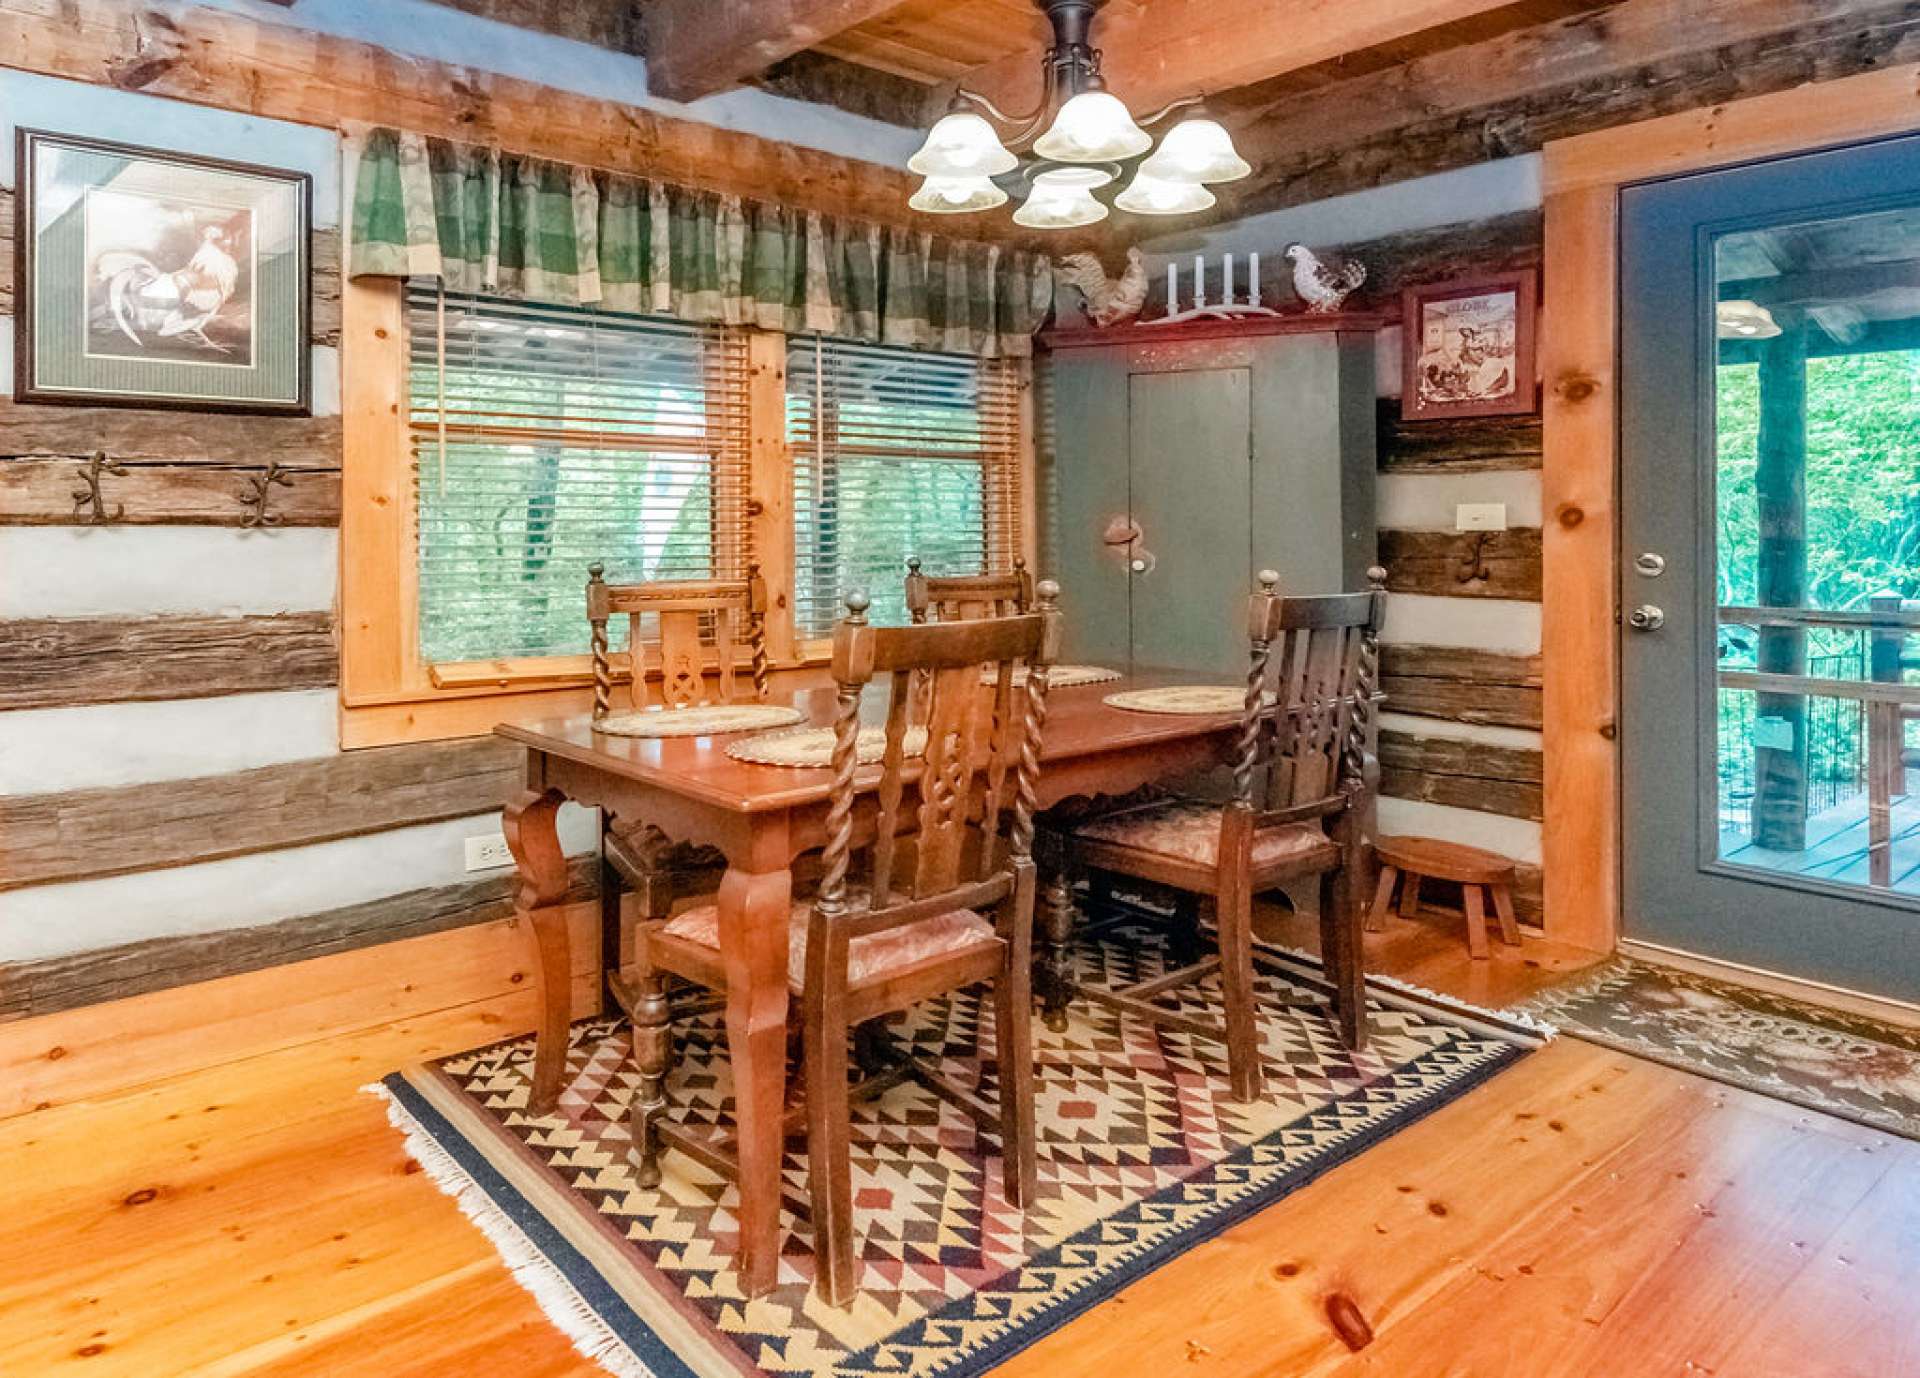 You'll savor the holiday dinner memories at your mountain cabin for years to come!